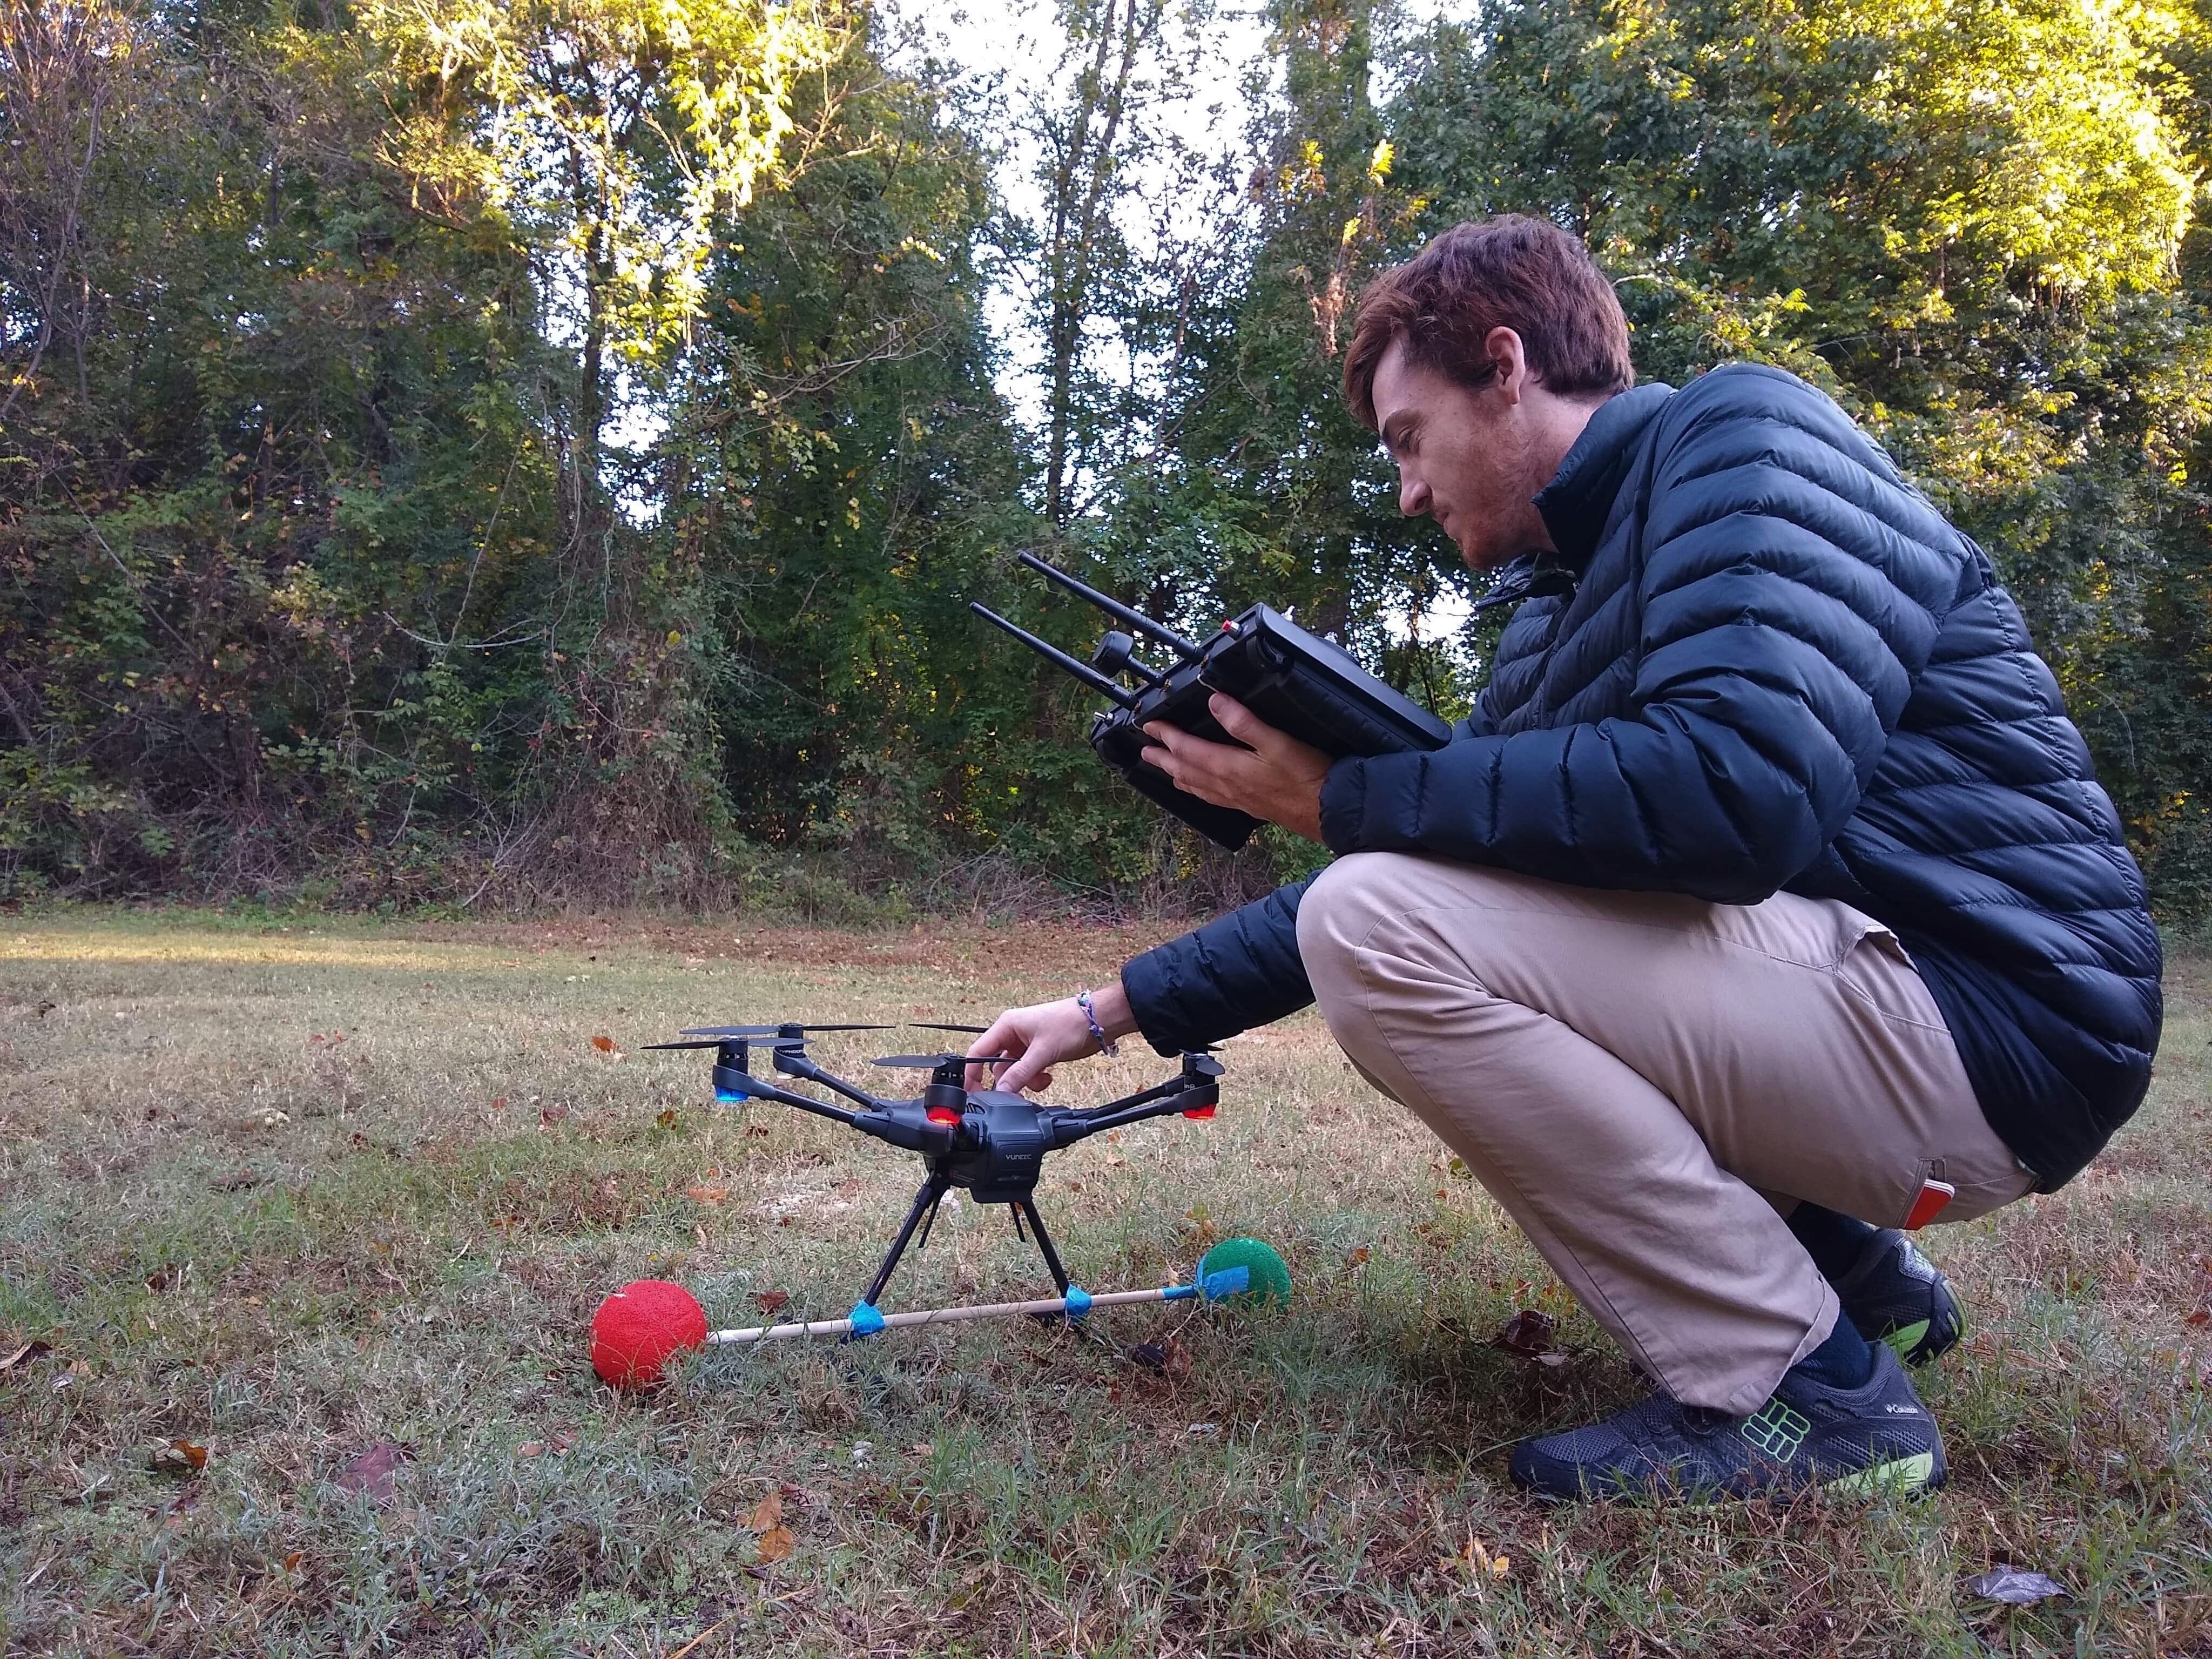 A scientist setting up a drone camera to track birds in flight